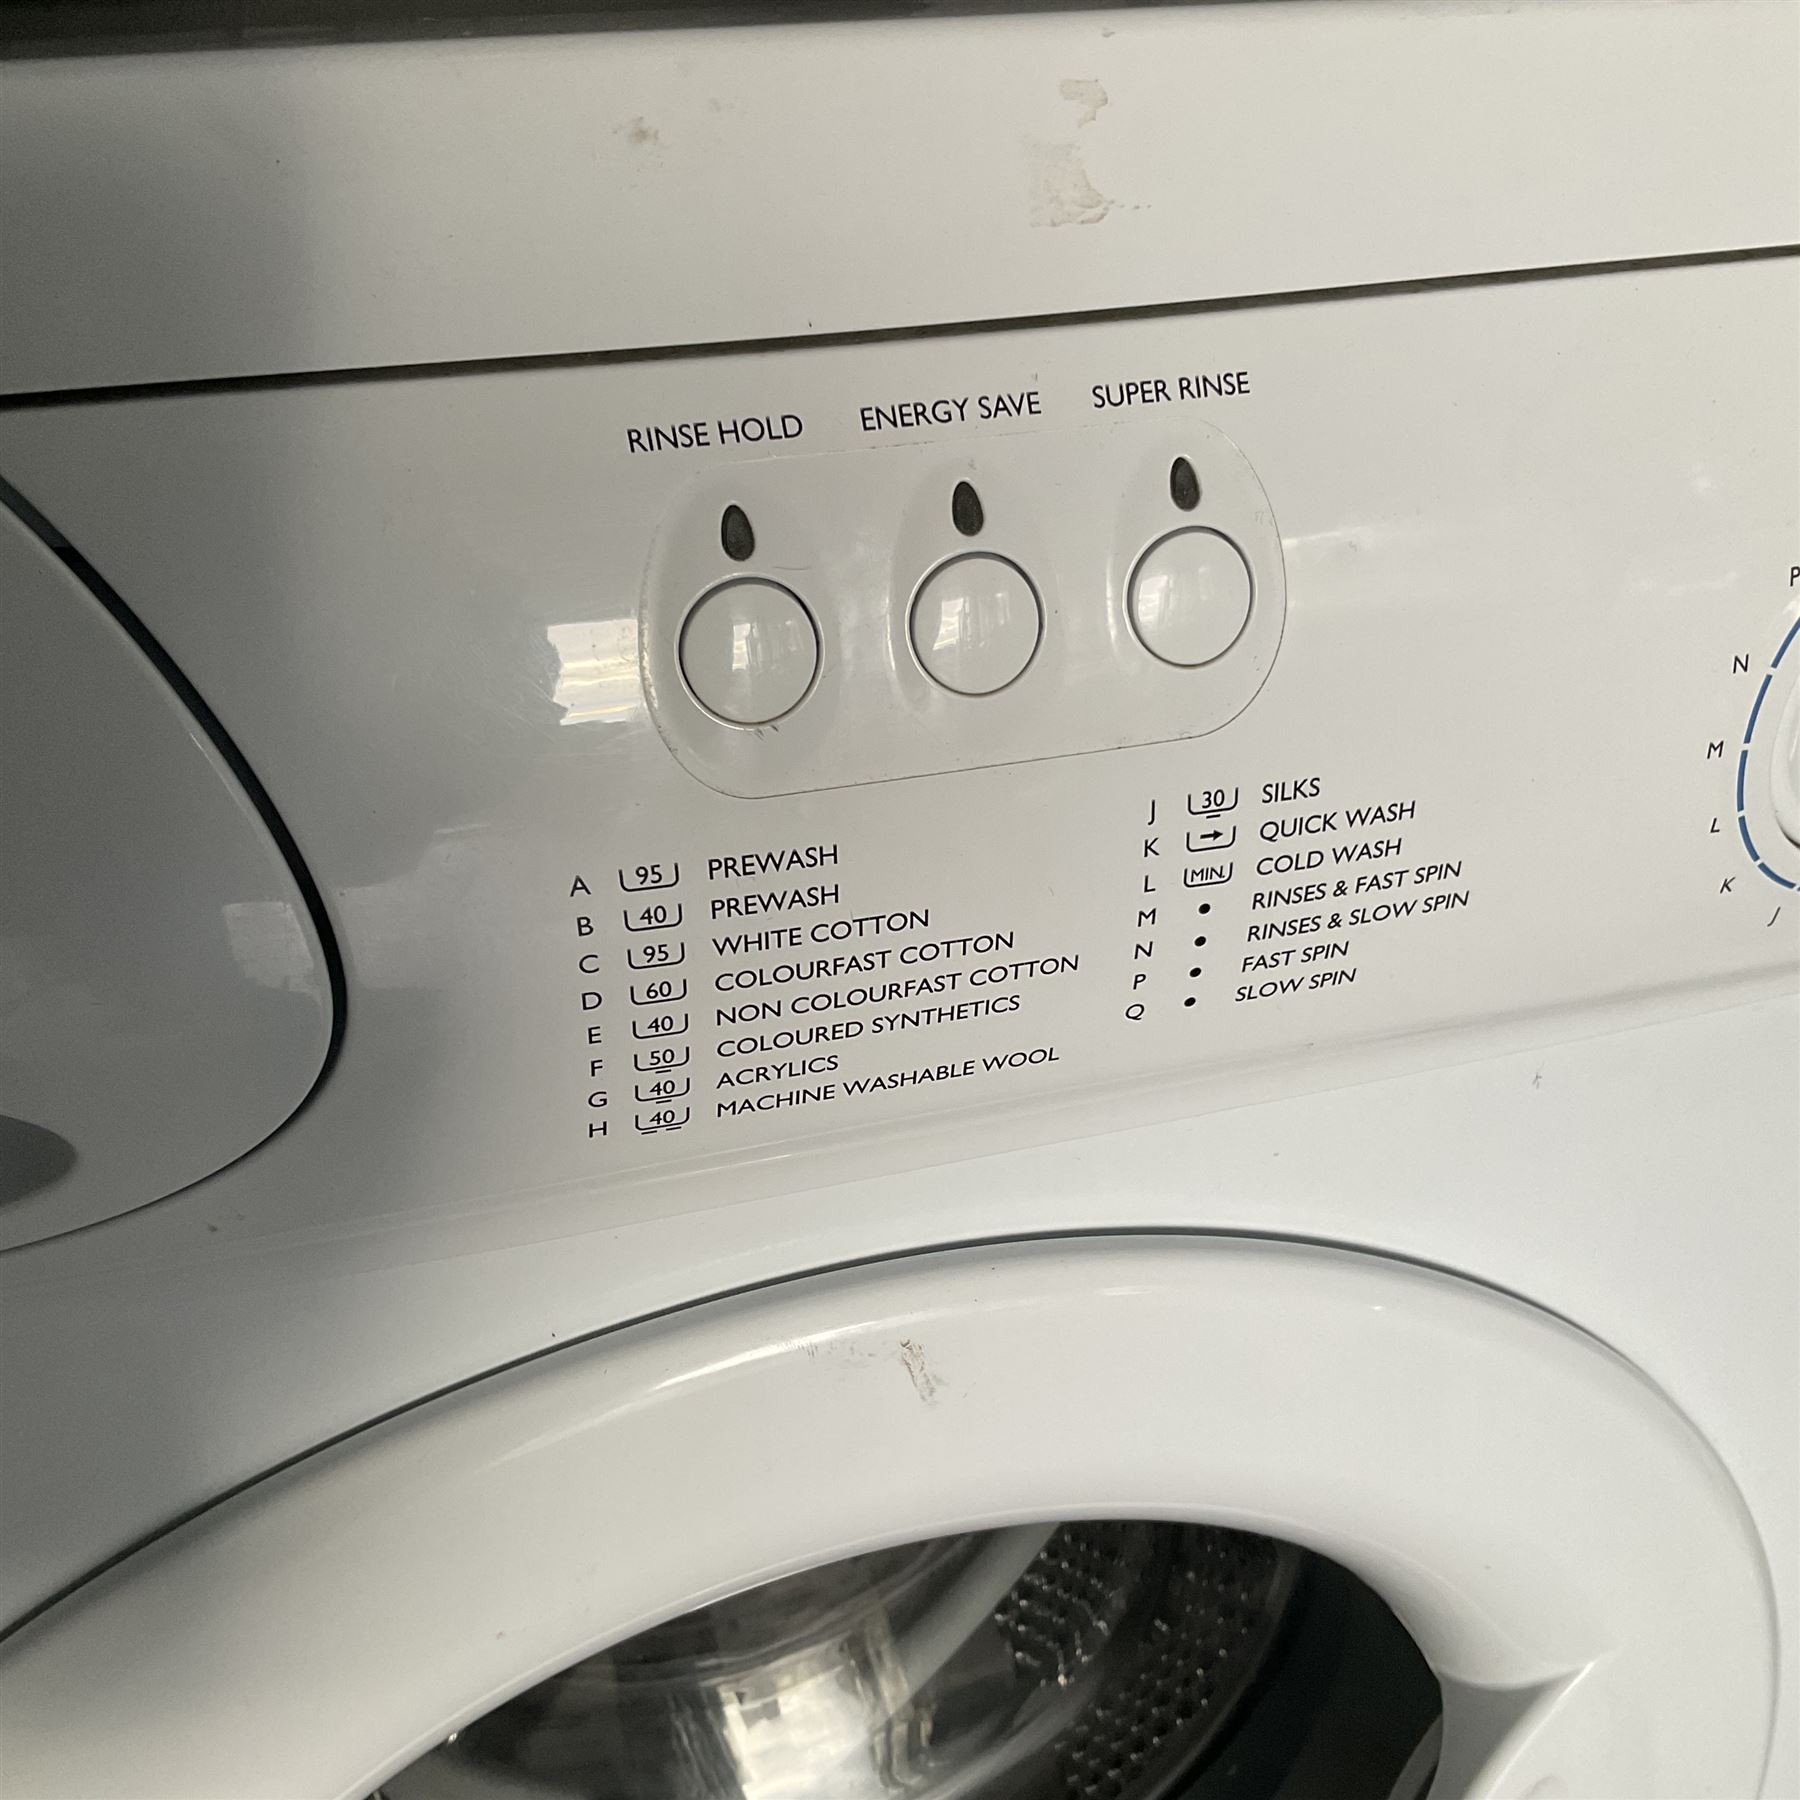 Hotpoint first edition washing machine - Image 2 of 3